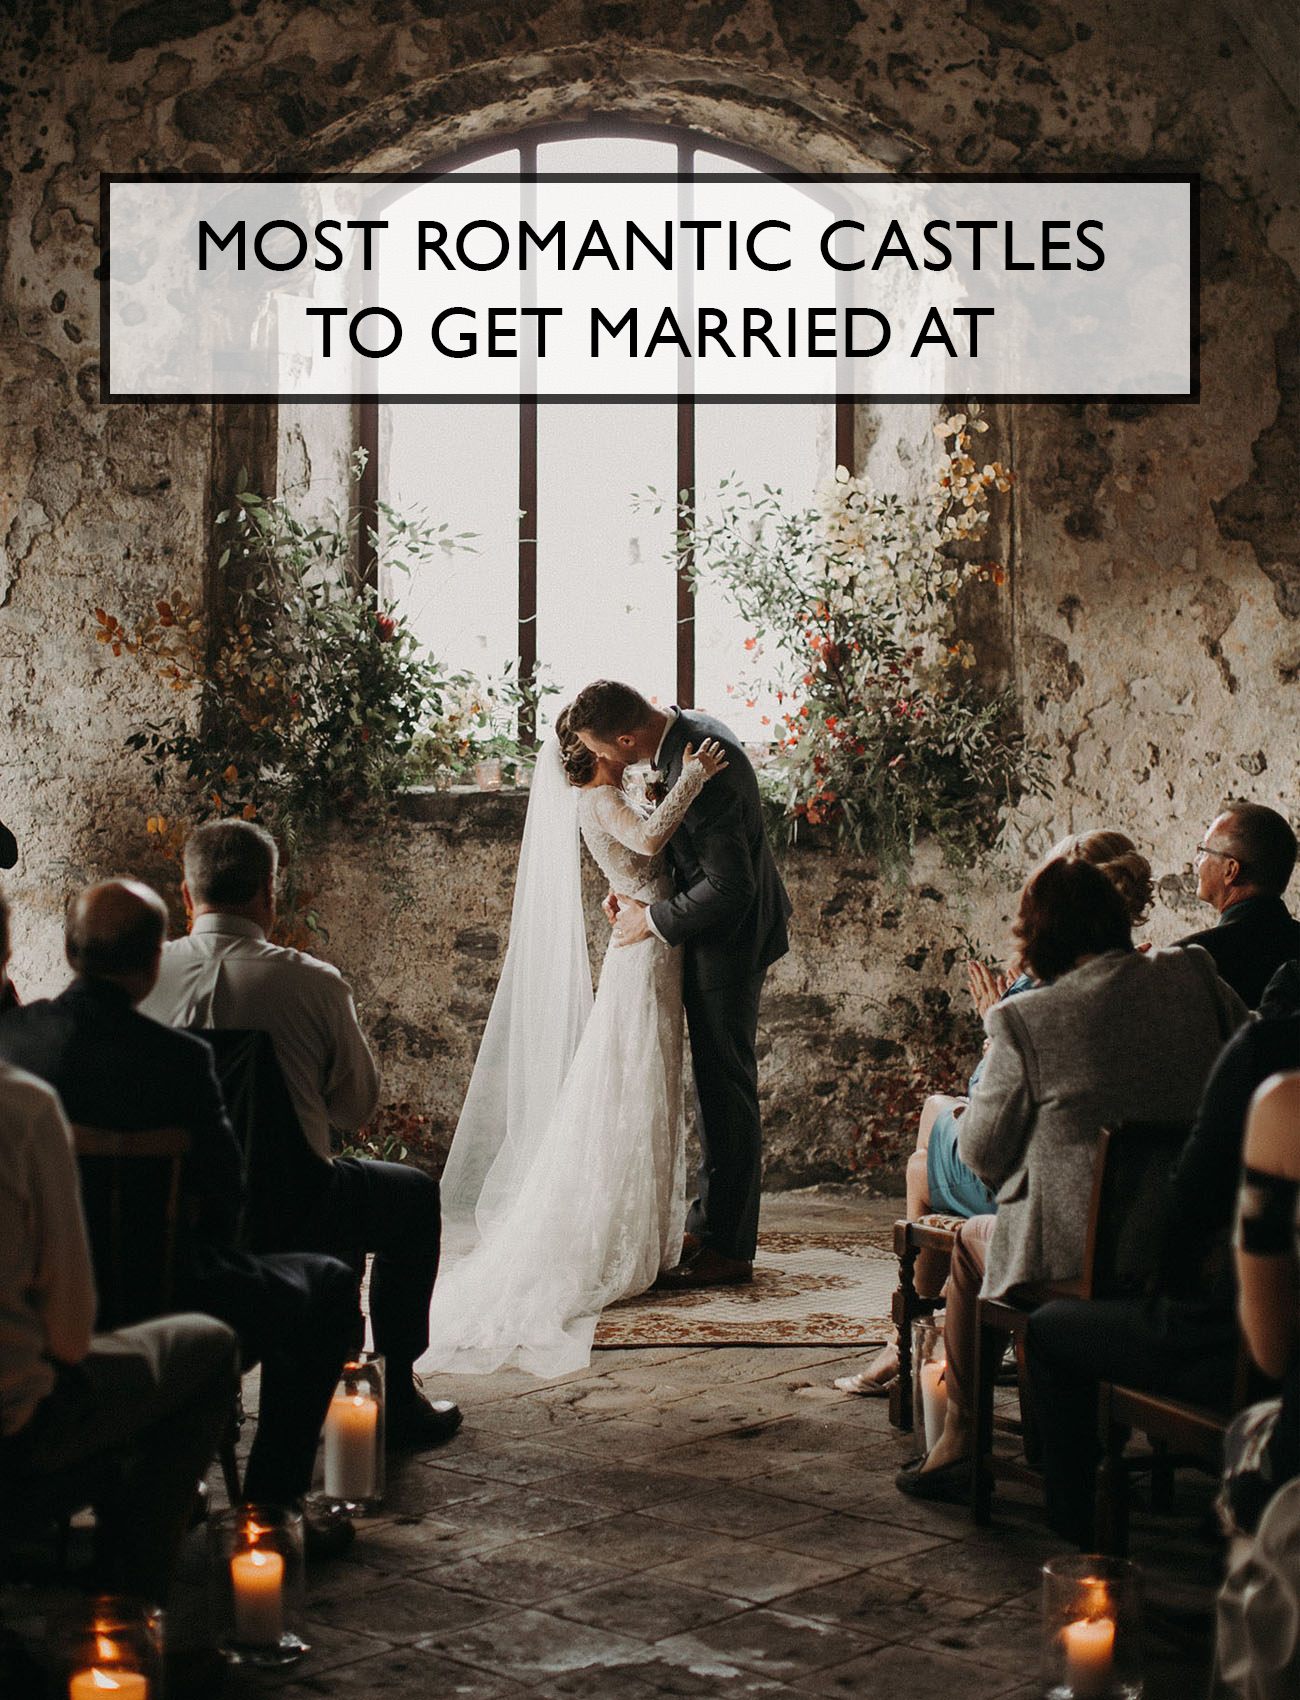 Live Out All Your Fairy Tale Dreams?These Are the Most Romantic Castles to Get Married At!